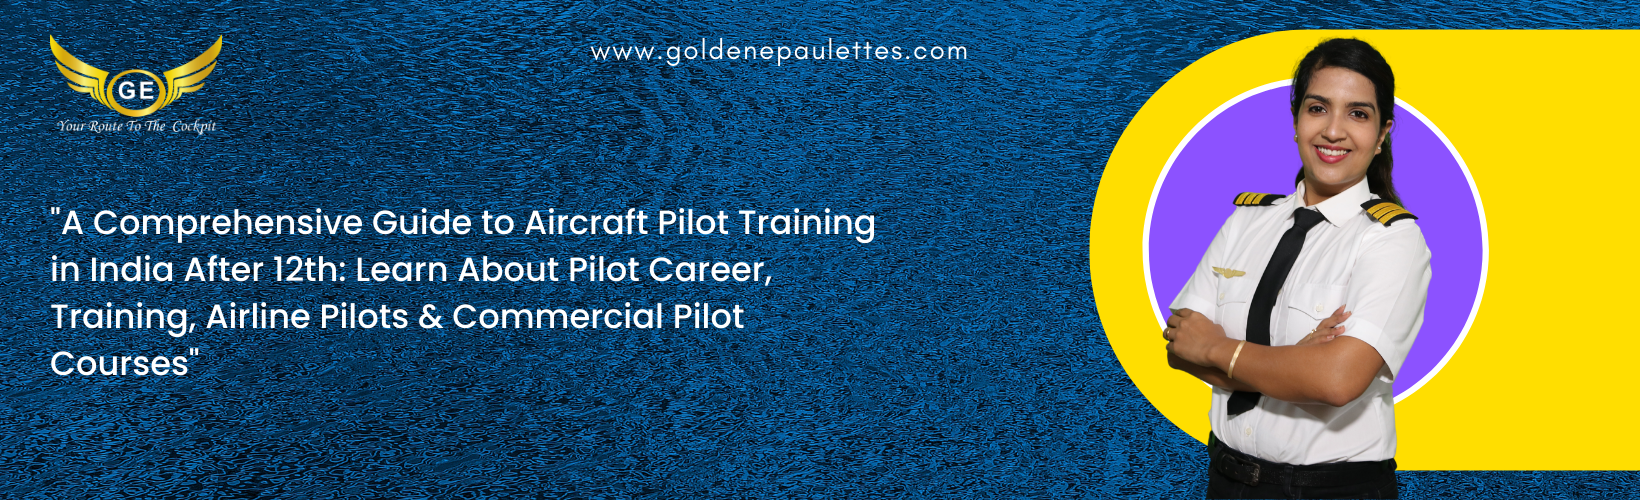 Aircraft Pilot Training in India After 12th